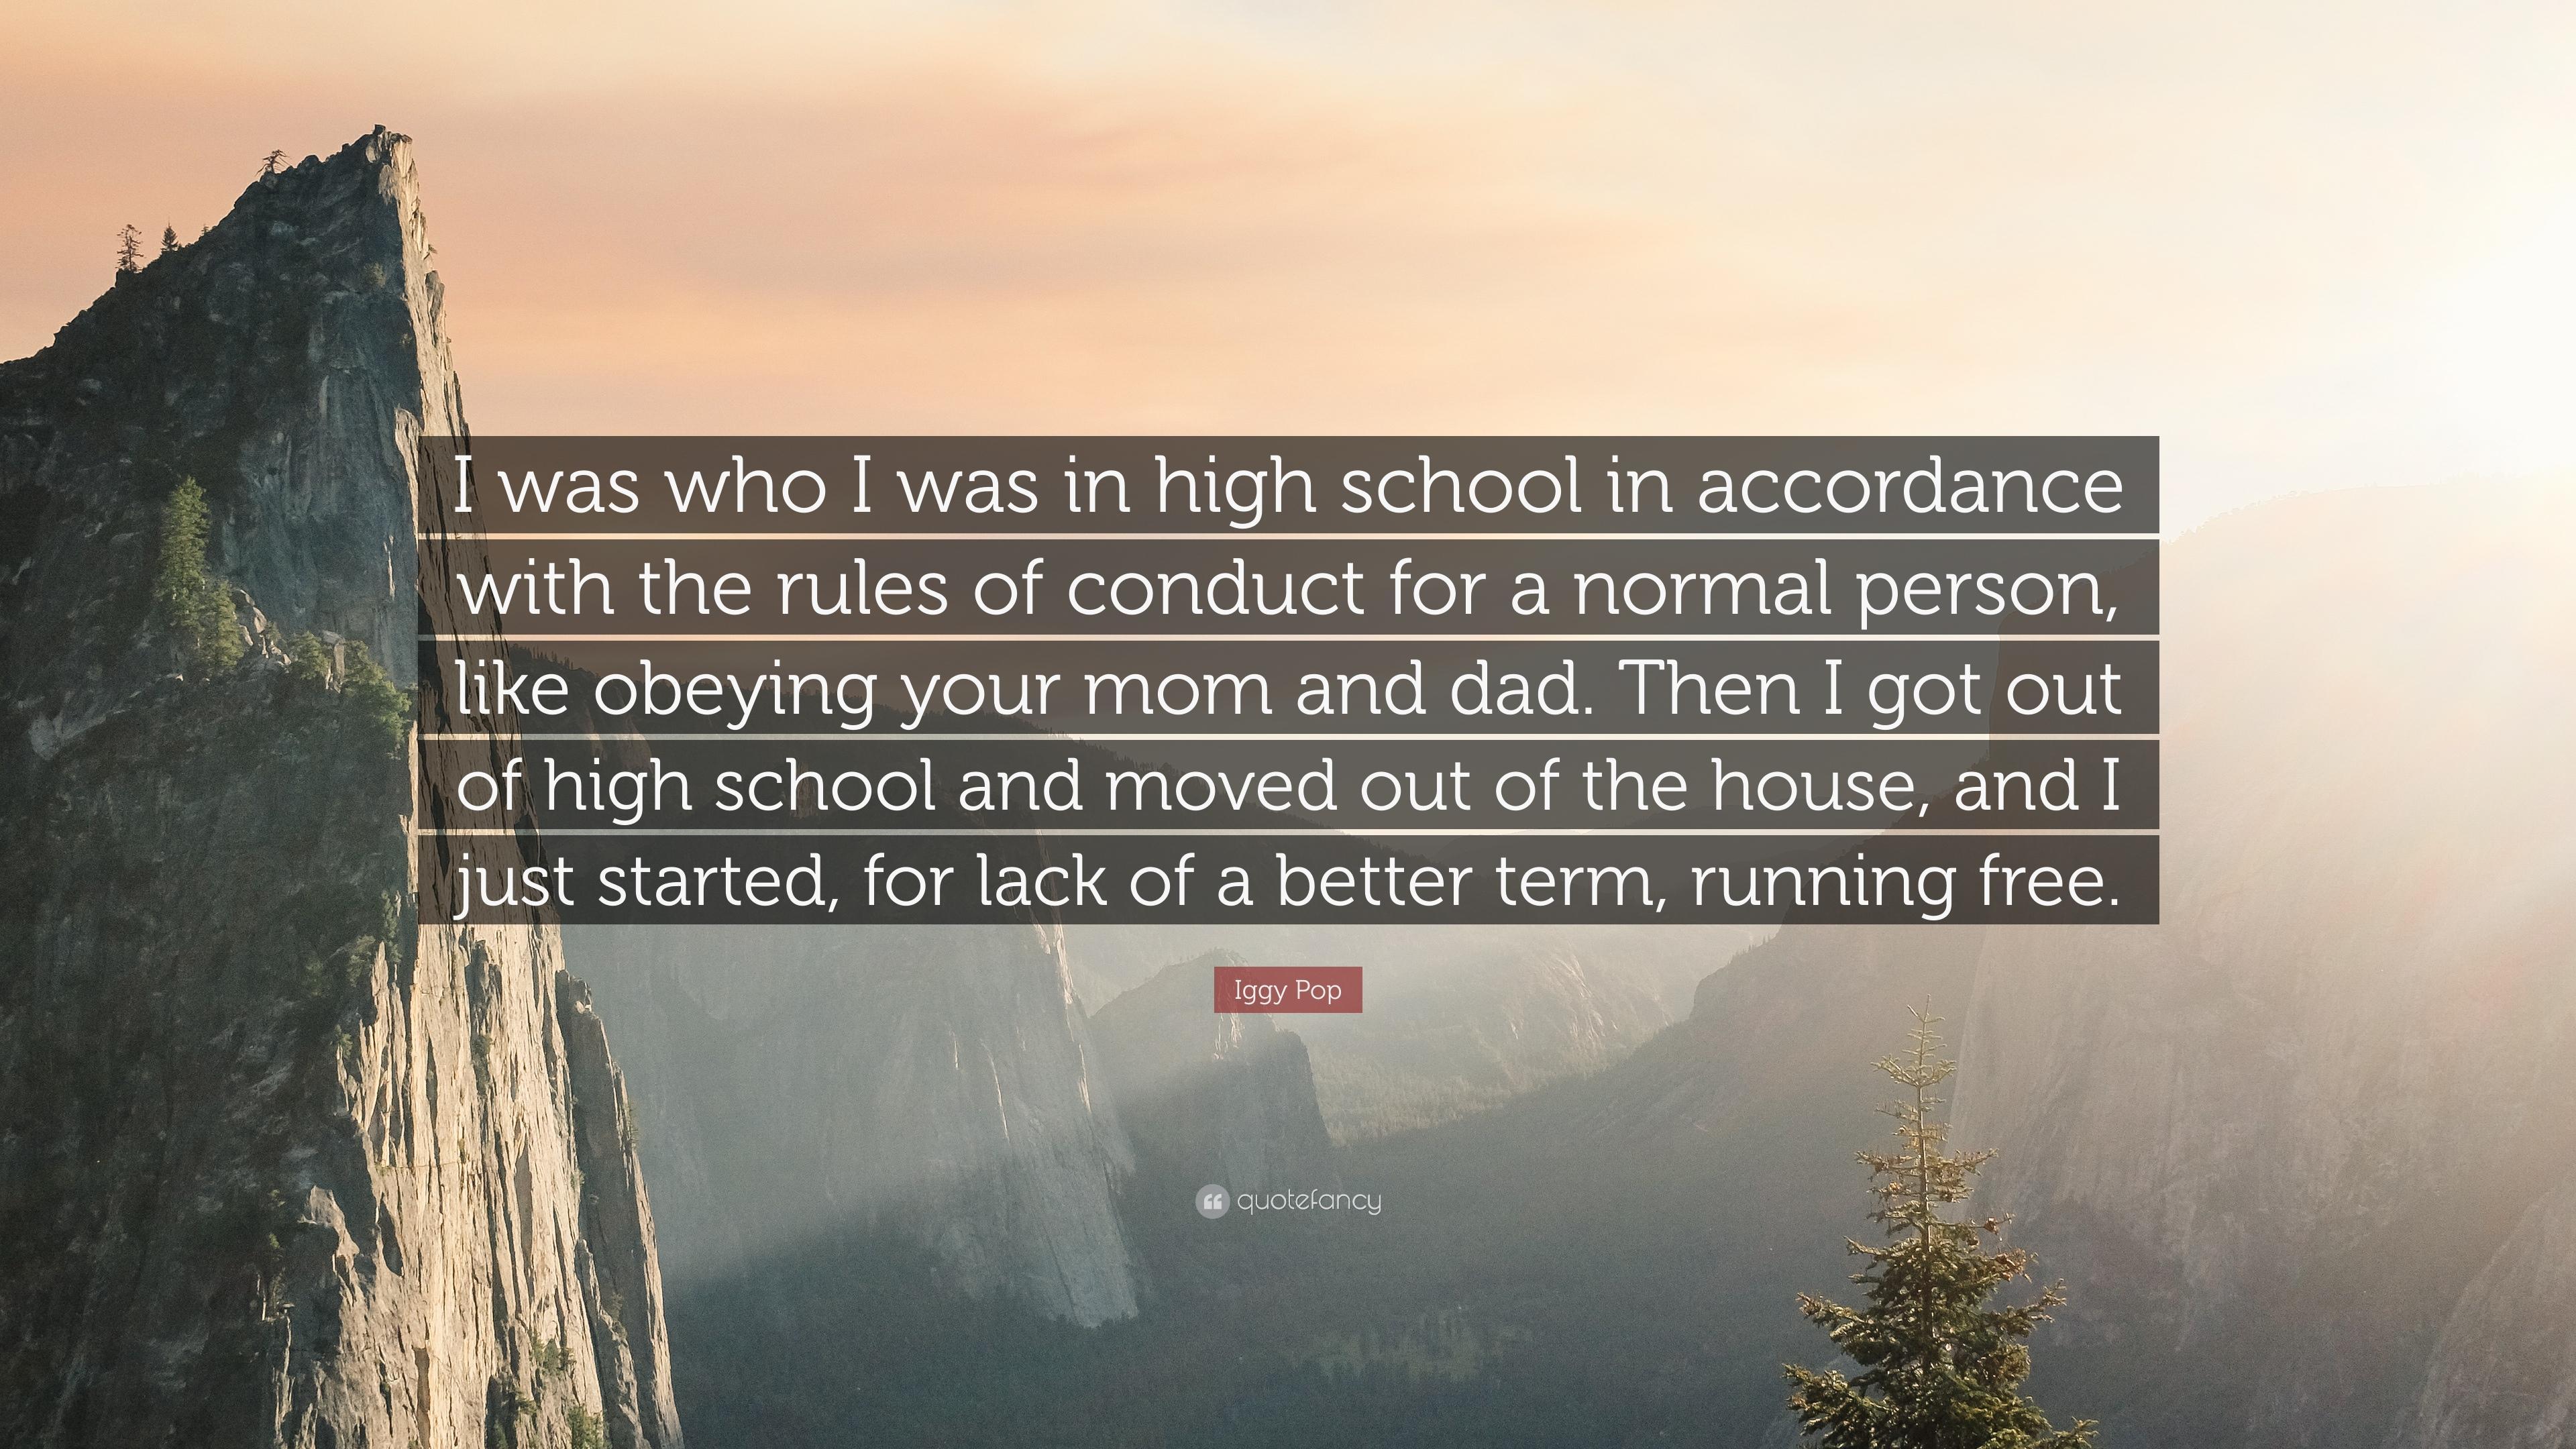 Iggy Pop Quote: “I was who I was in high school in accordance